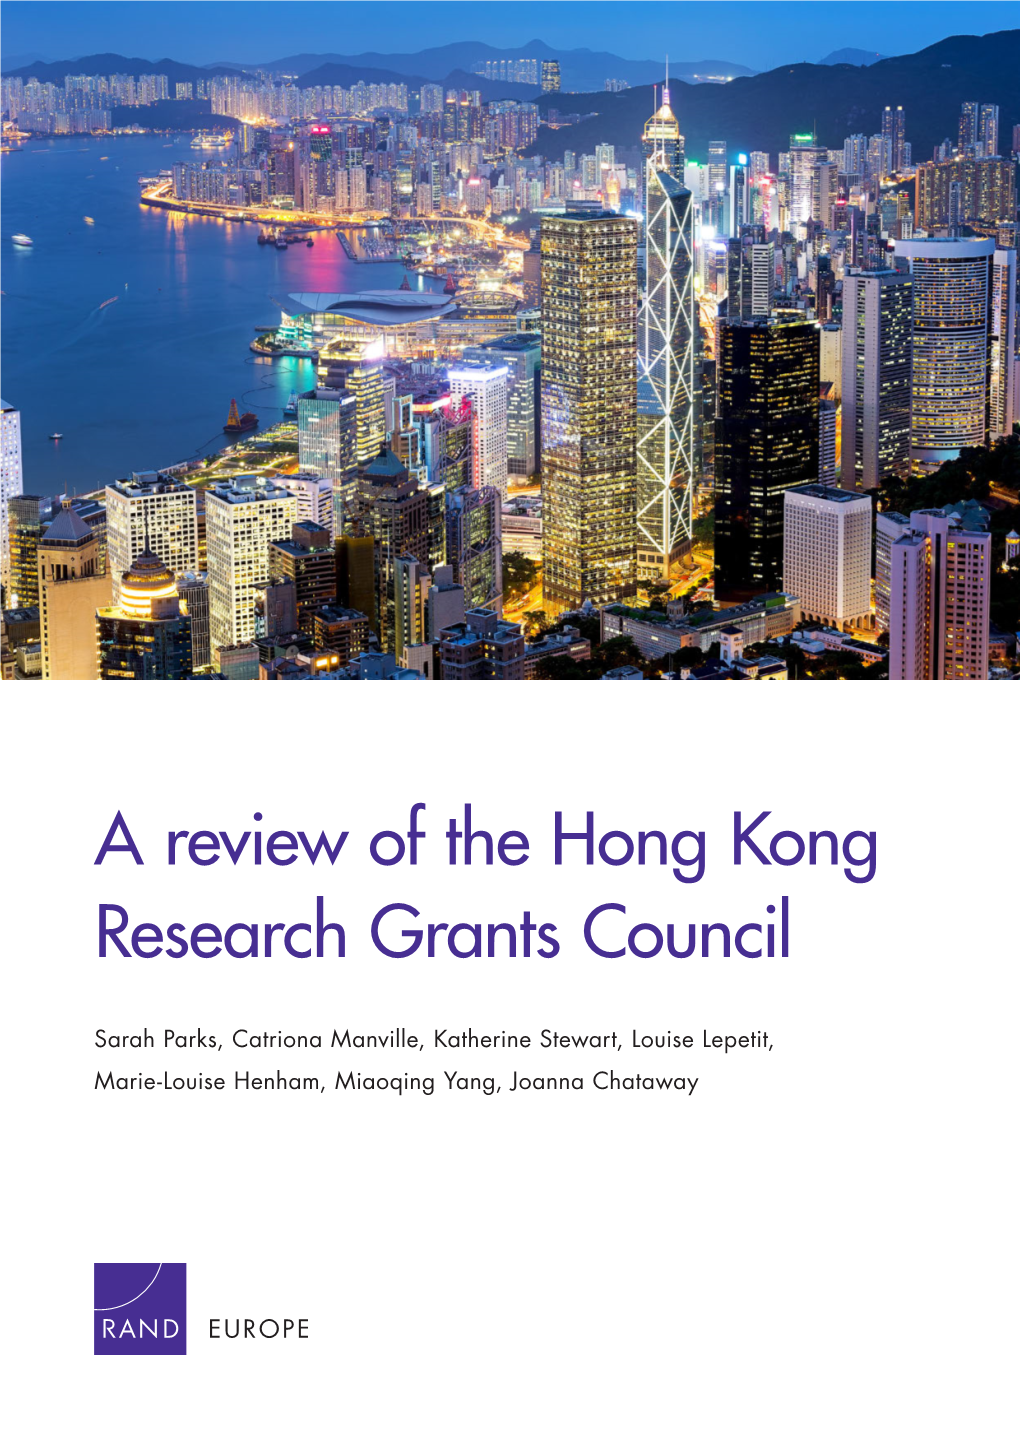 A Review of the Hong Kong Research Grants Council